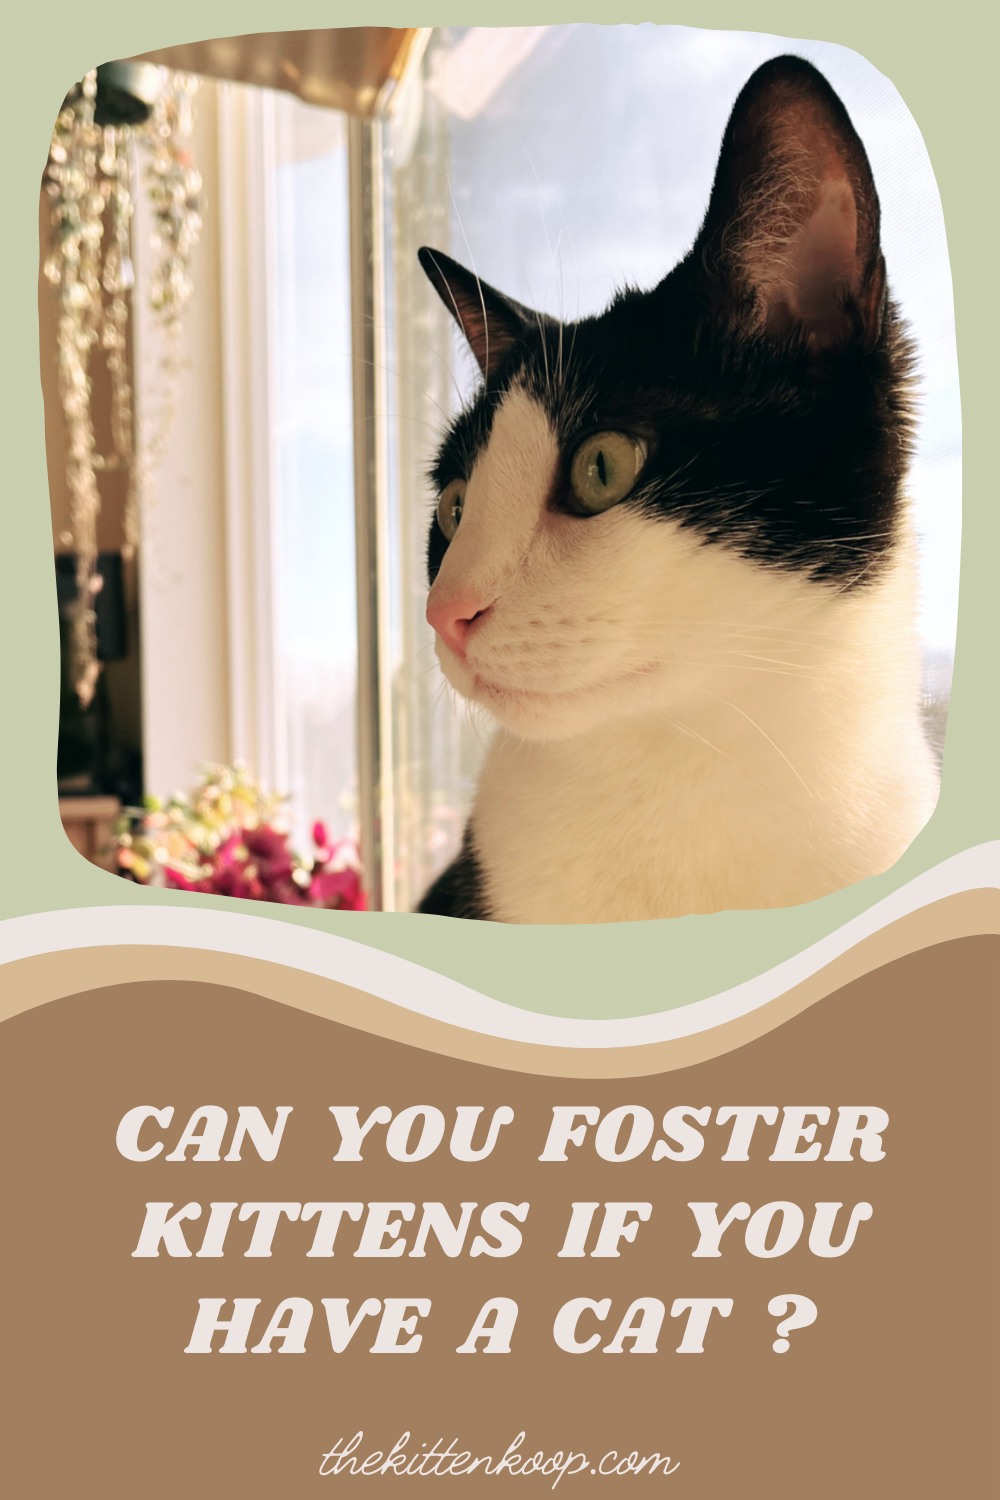 Can You Foster Kittens if You Have a Cat?